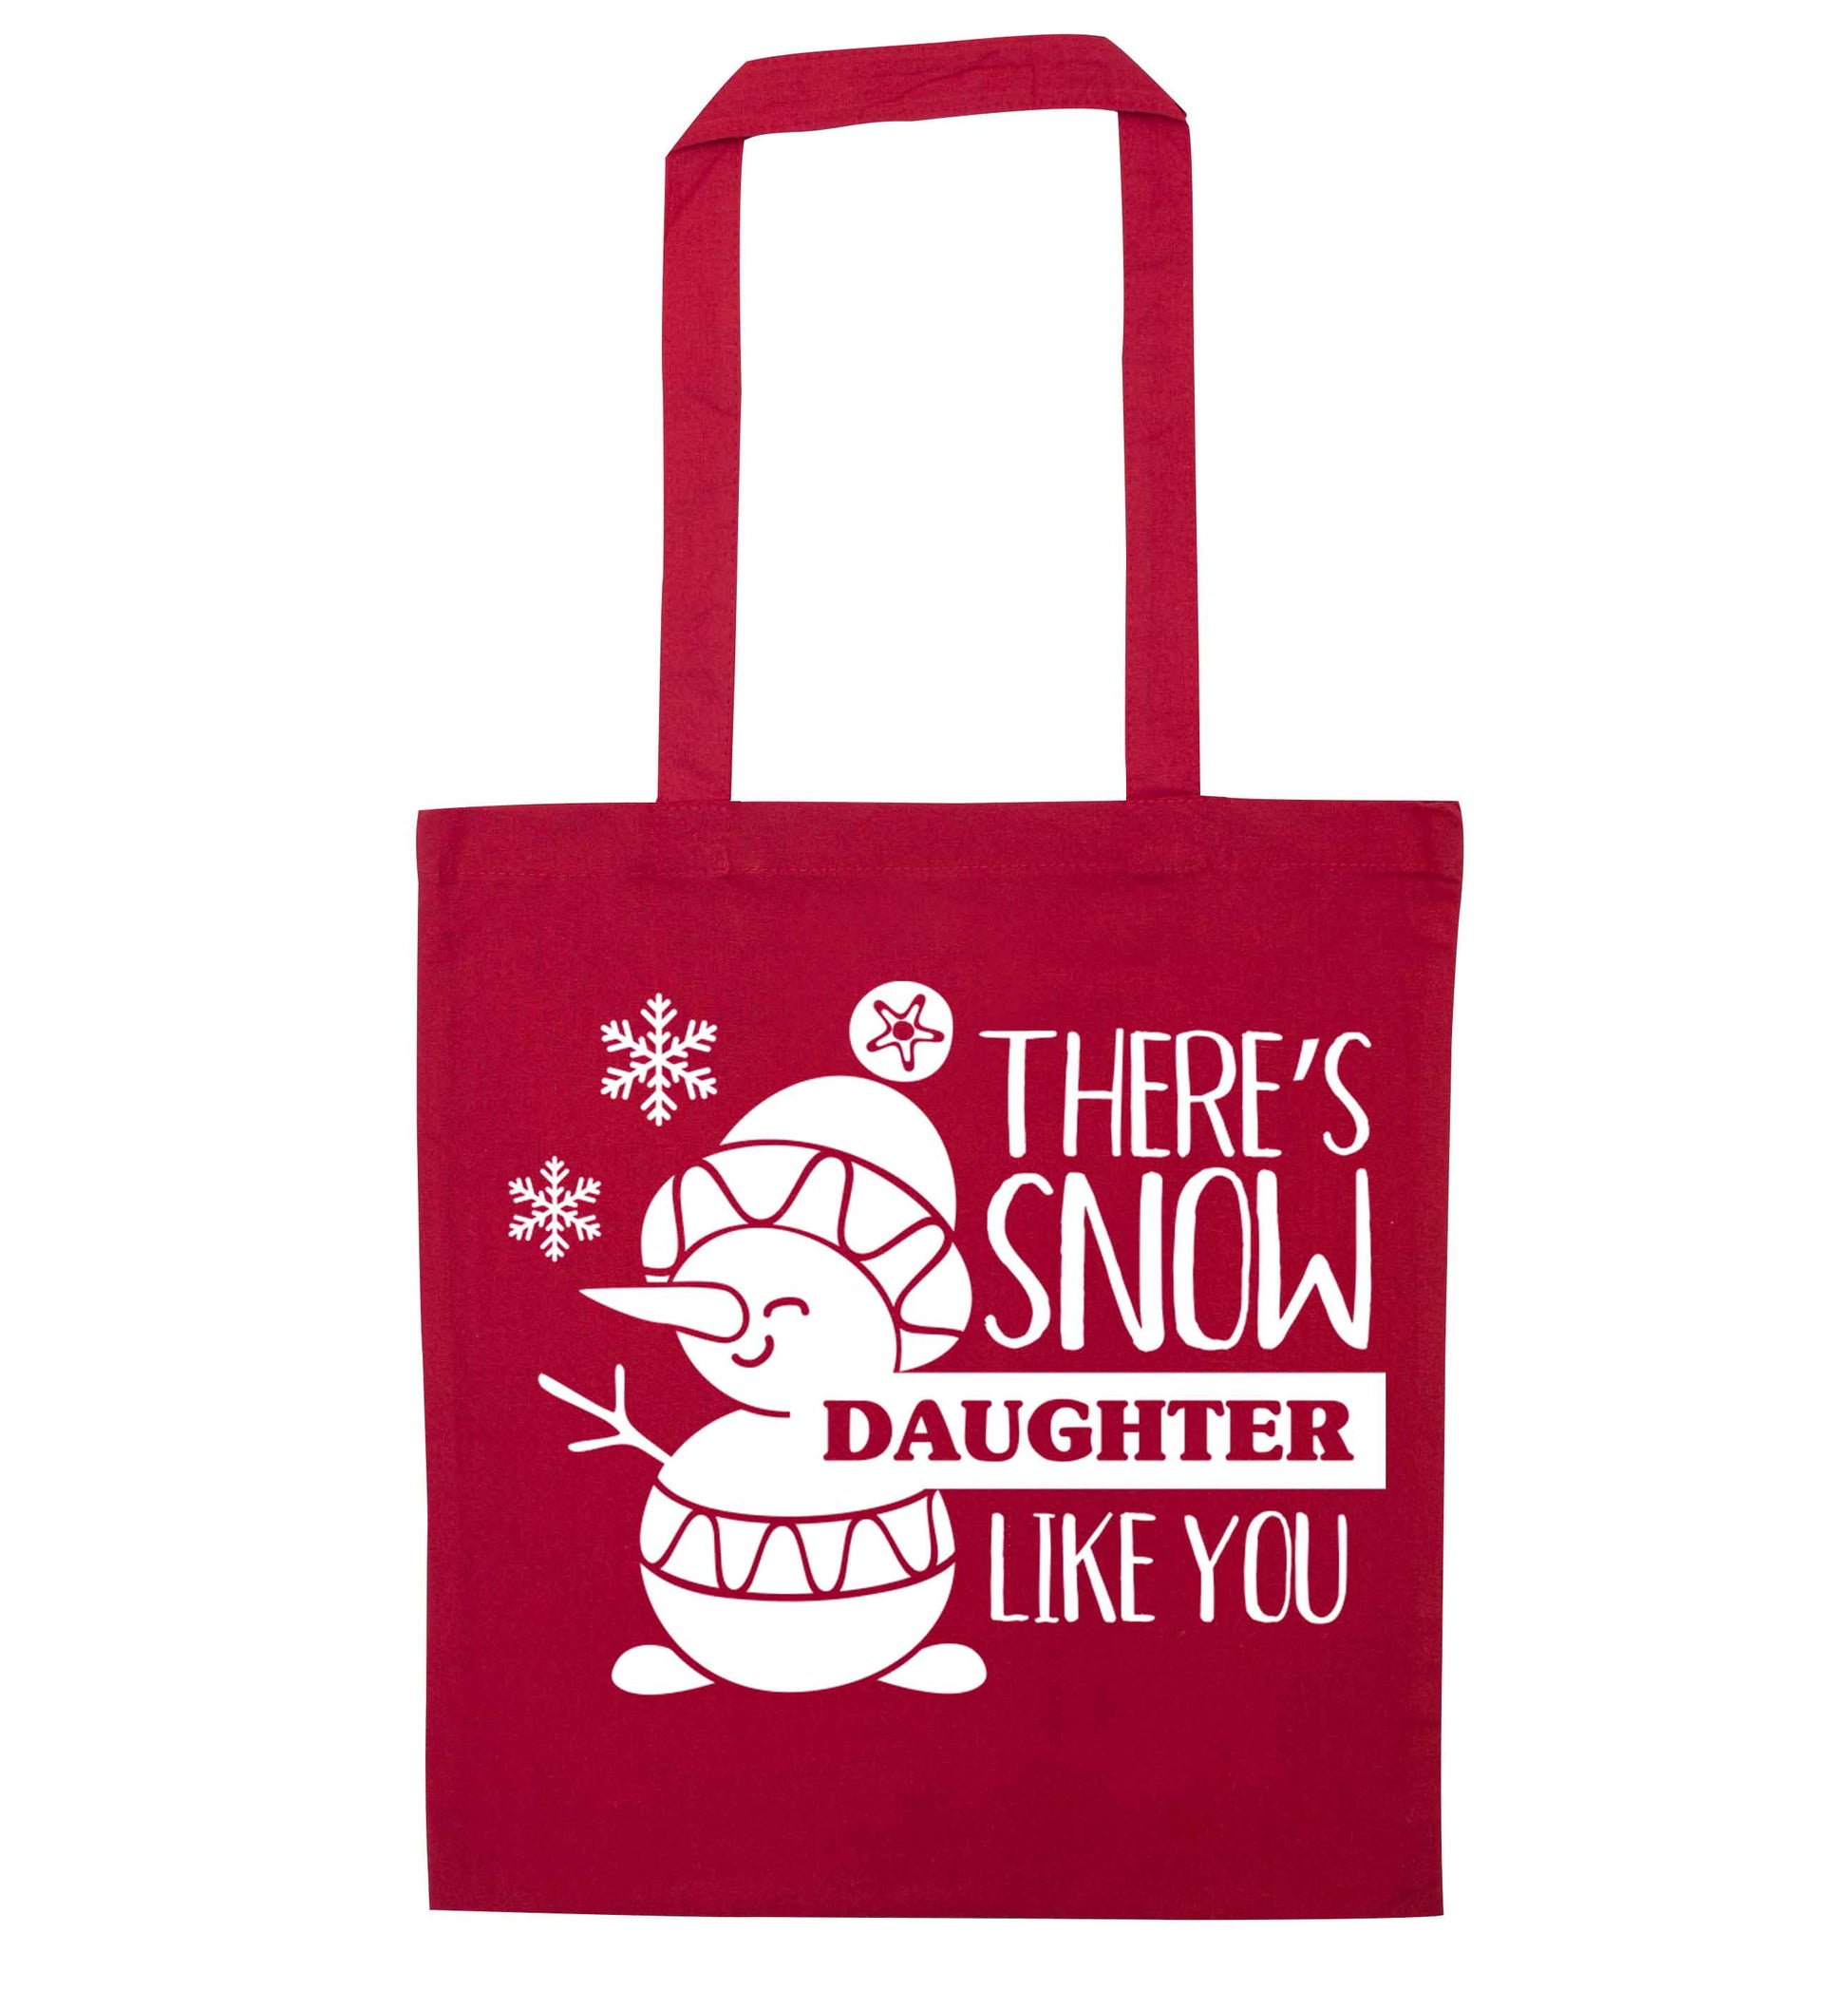 There's snow daughter like you red tote bag